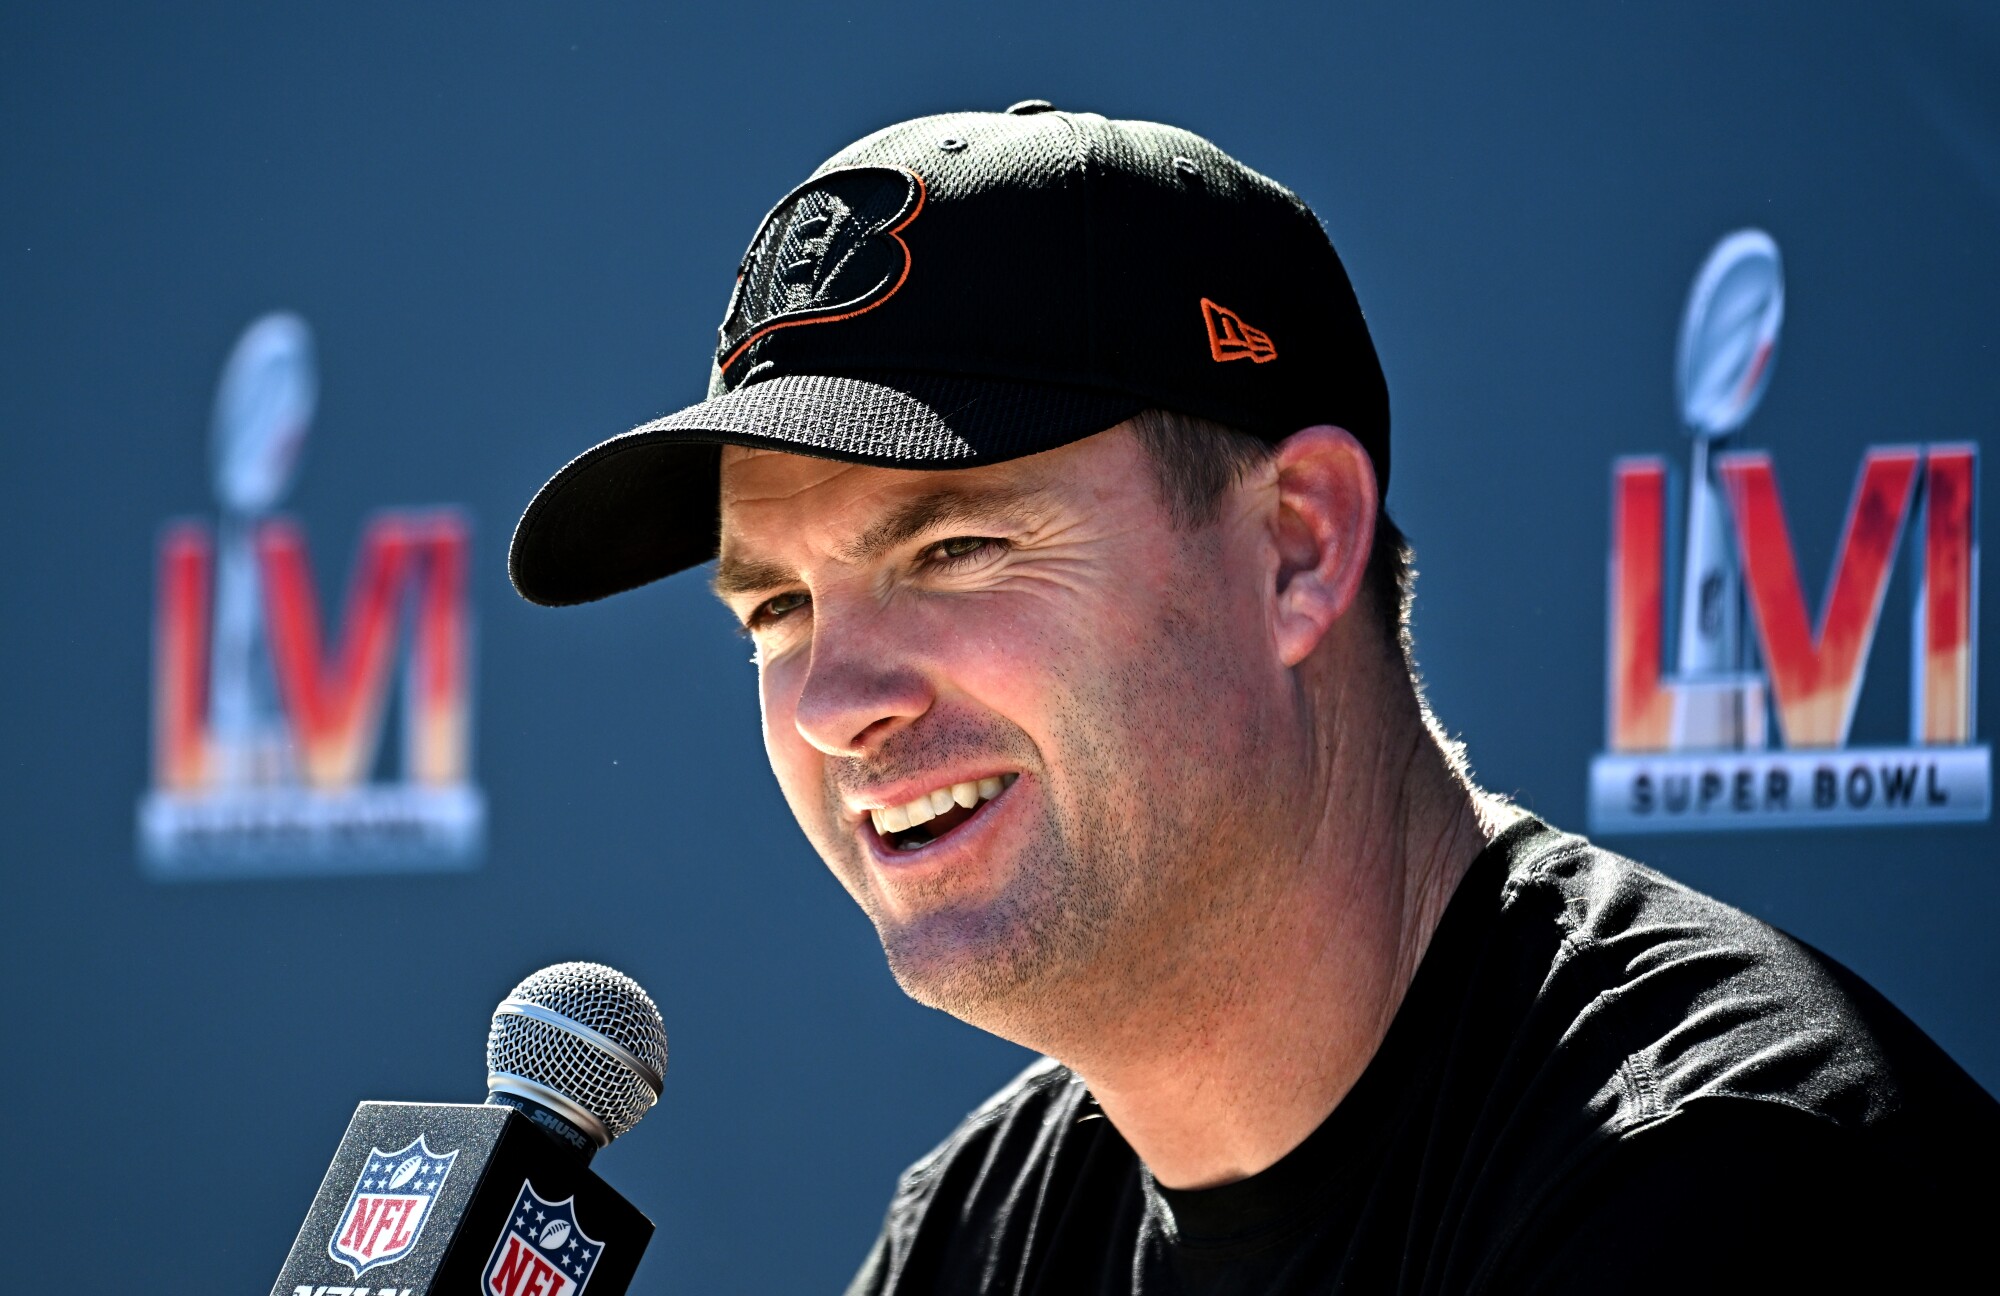 Bengals head coach Zac Taylor speaks at media day before the Super Bowl at UCLA Friday.